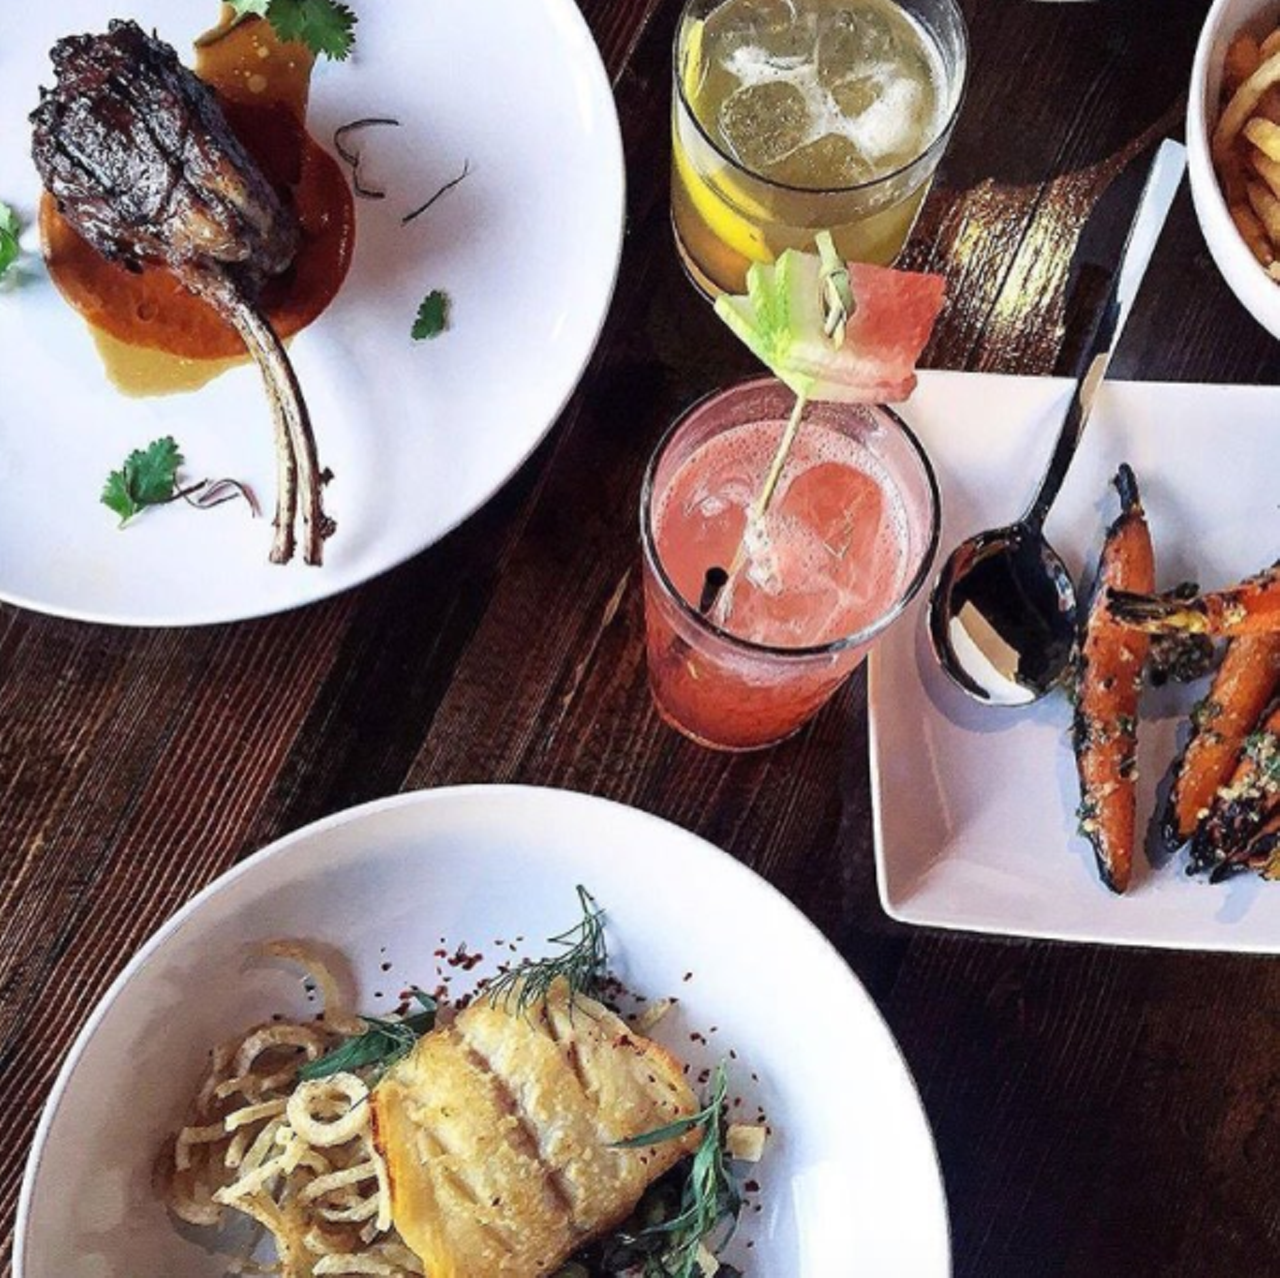 Grey Ghost, 47 Watson St. Upscale steakhouse, featuring unique craft cocktails, and playful small plates and desserts. Photo via @greyghostdetroit